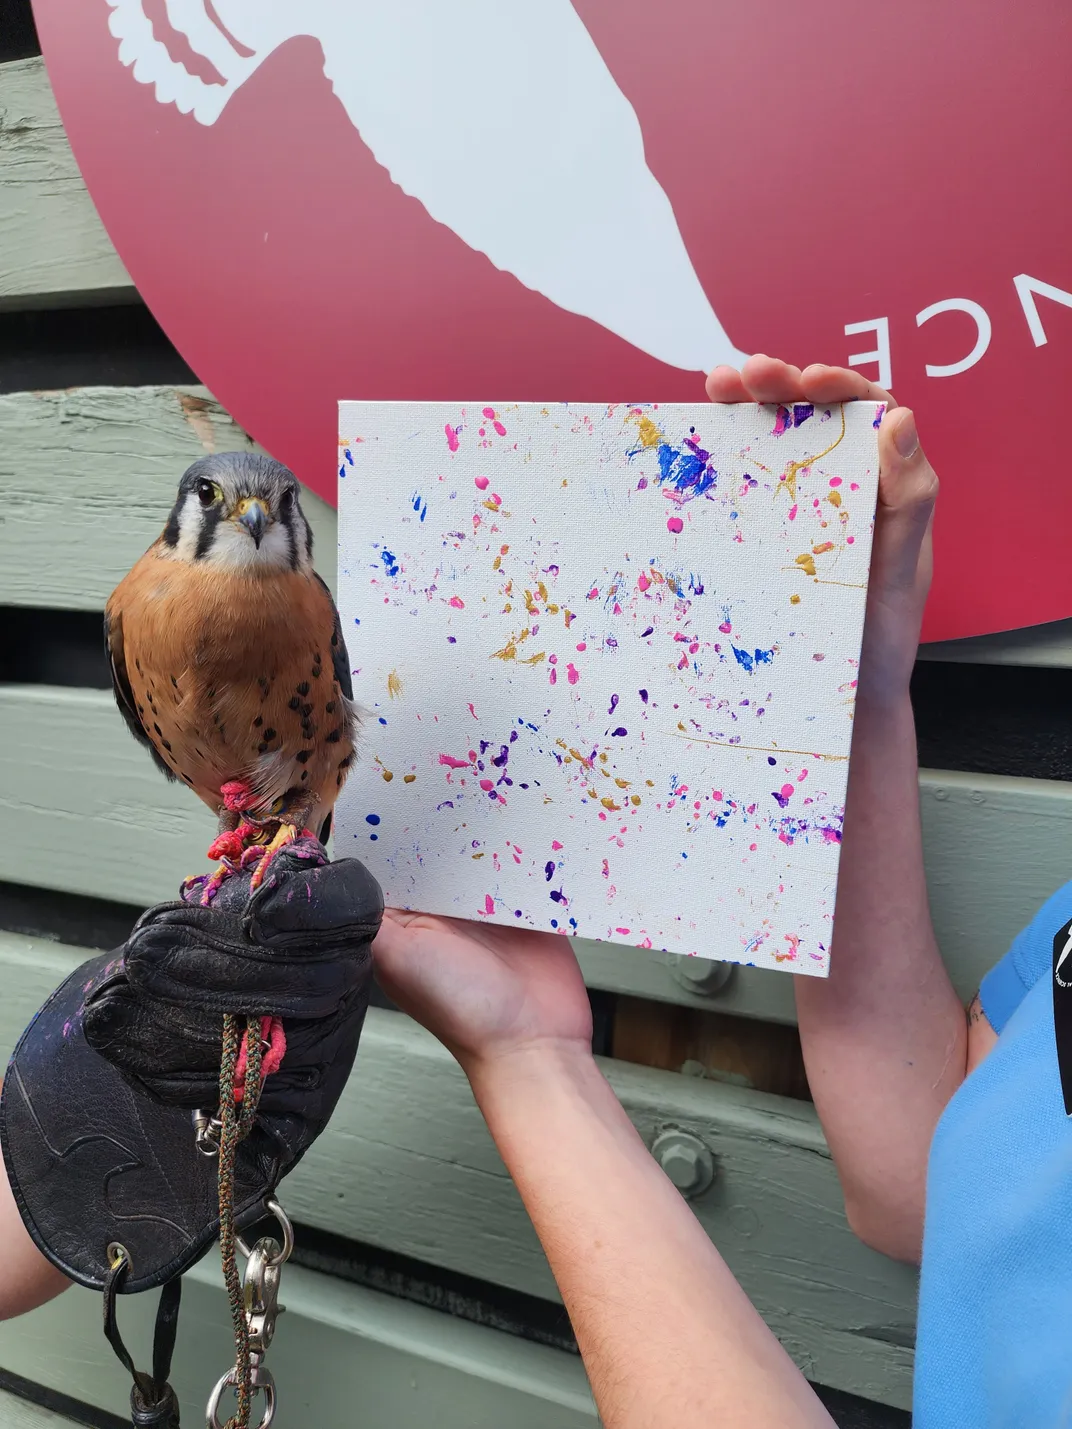 kestrel held in front of a painting with blue, orange, pink and purple dots in front of a VINS sign